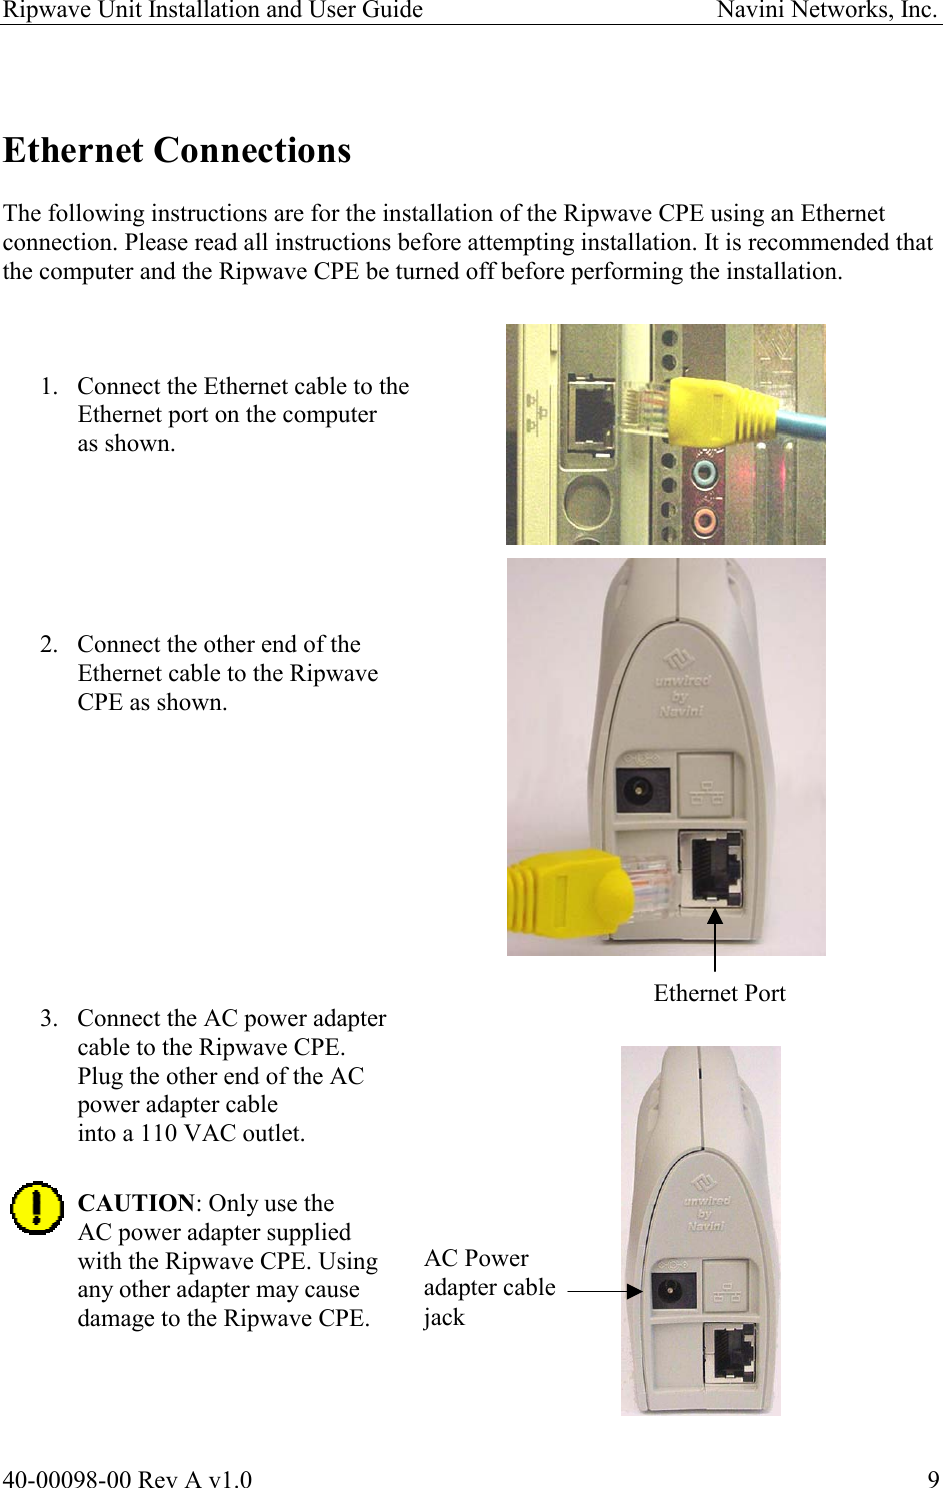 Ripwave Unit Installation and User Guide                                               Navini Networks, Inc.   Ethernet Connections  The following instructions are for the installation of the Ripwave CPE using an Ethernet connection. Please read all instructions before attempting installation. It is recommended that the computer and the Ripwave CPE be turned off before performing the installation.    1.  Connect the Ethernet cable to the Ethernet port on the computer as shown.       2.  Connect the other end of the  Ethernet cable to the Ripwave CPE as shown.           Ethernet Port 3.  Connect the AC power adapter  cable to the Ripwave CPE.  Plug the other end of the AC  power adapter cable  into a 110 VAC outlet.  CAUTION: Only use the AC power adapter supplied  with the Ripwave CPE. Using any other adapter may cause damage to the Ripwave CPE. AC Power  adapter cable jack     40-00098-00 Rev A v1.0  9